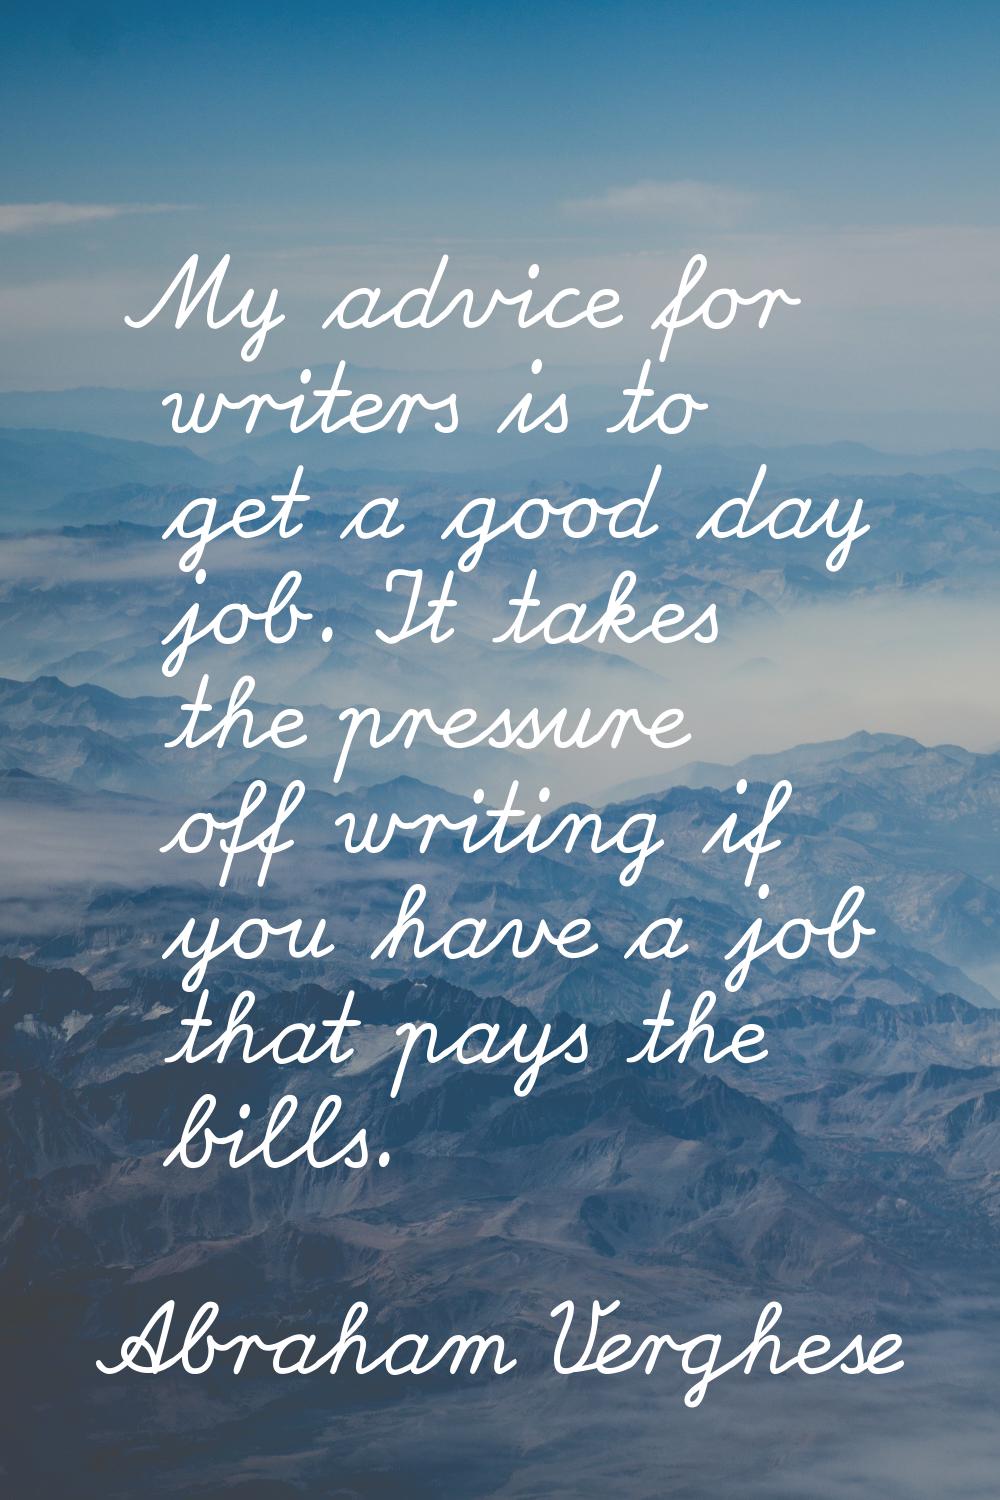 My advice for writers is to get a good day job. It takes the pressure off writing if you have a job